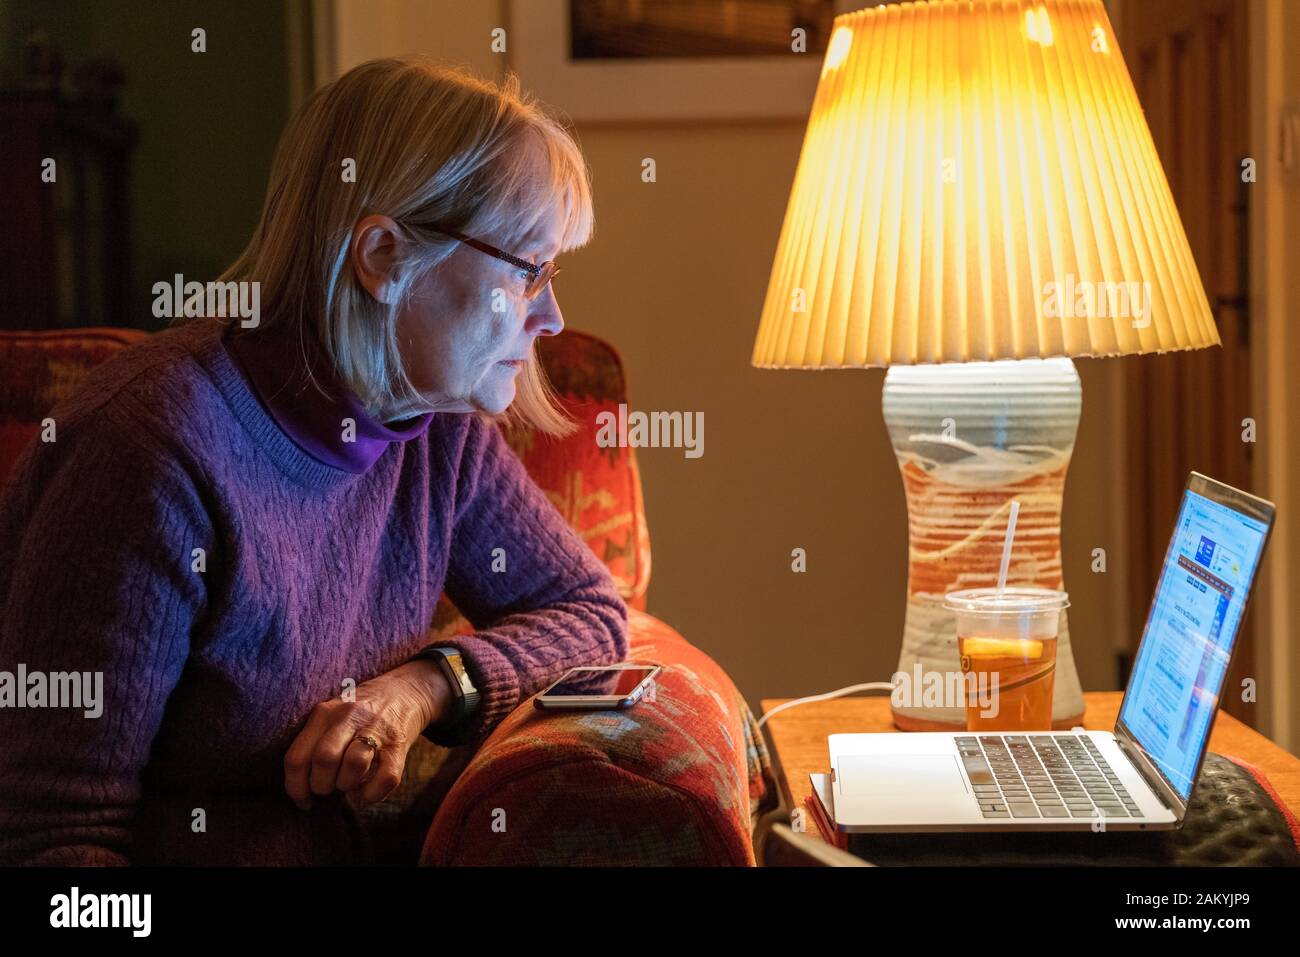 Woman reading at home on a laptop computer Stock Photo